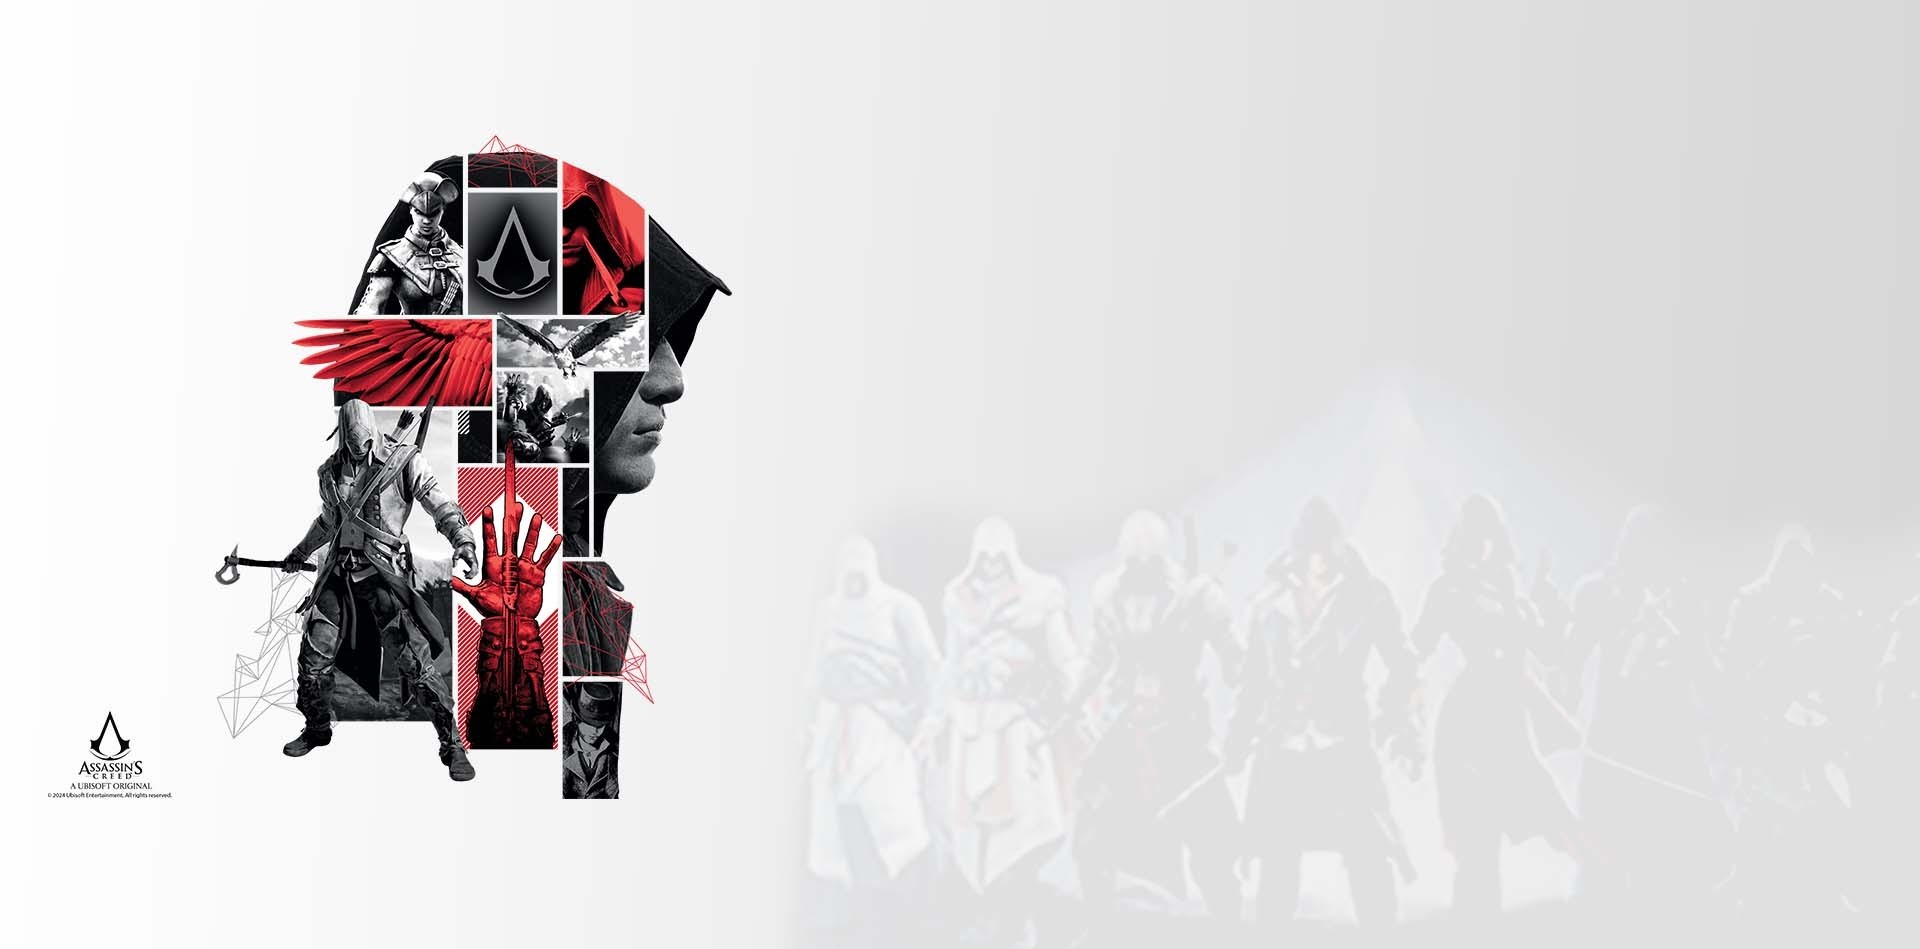 Productos oficiales Assasin's Creed | Subsonic